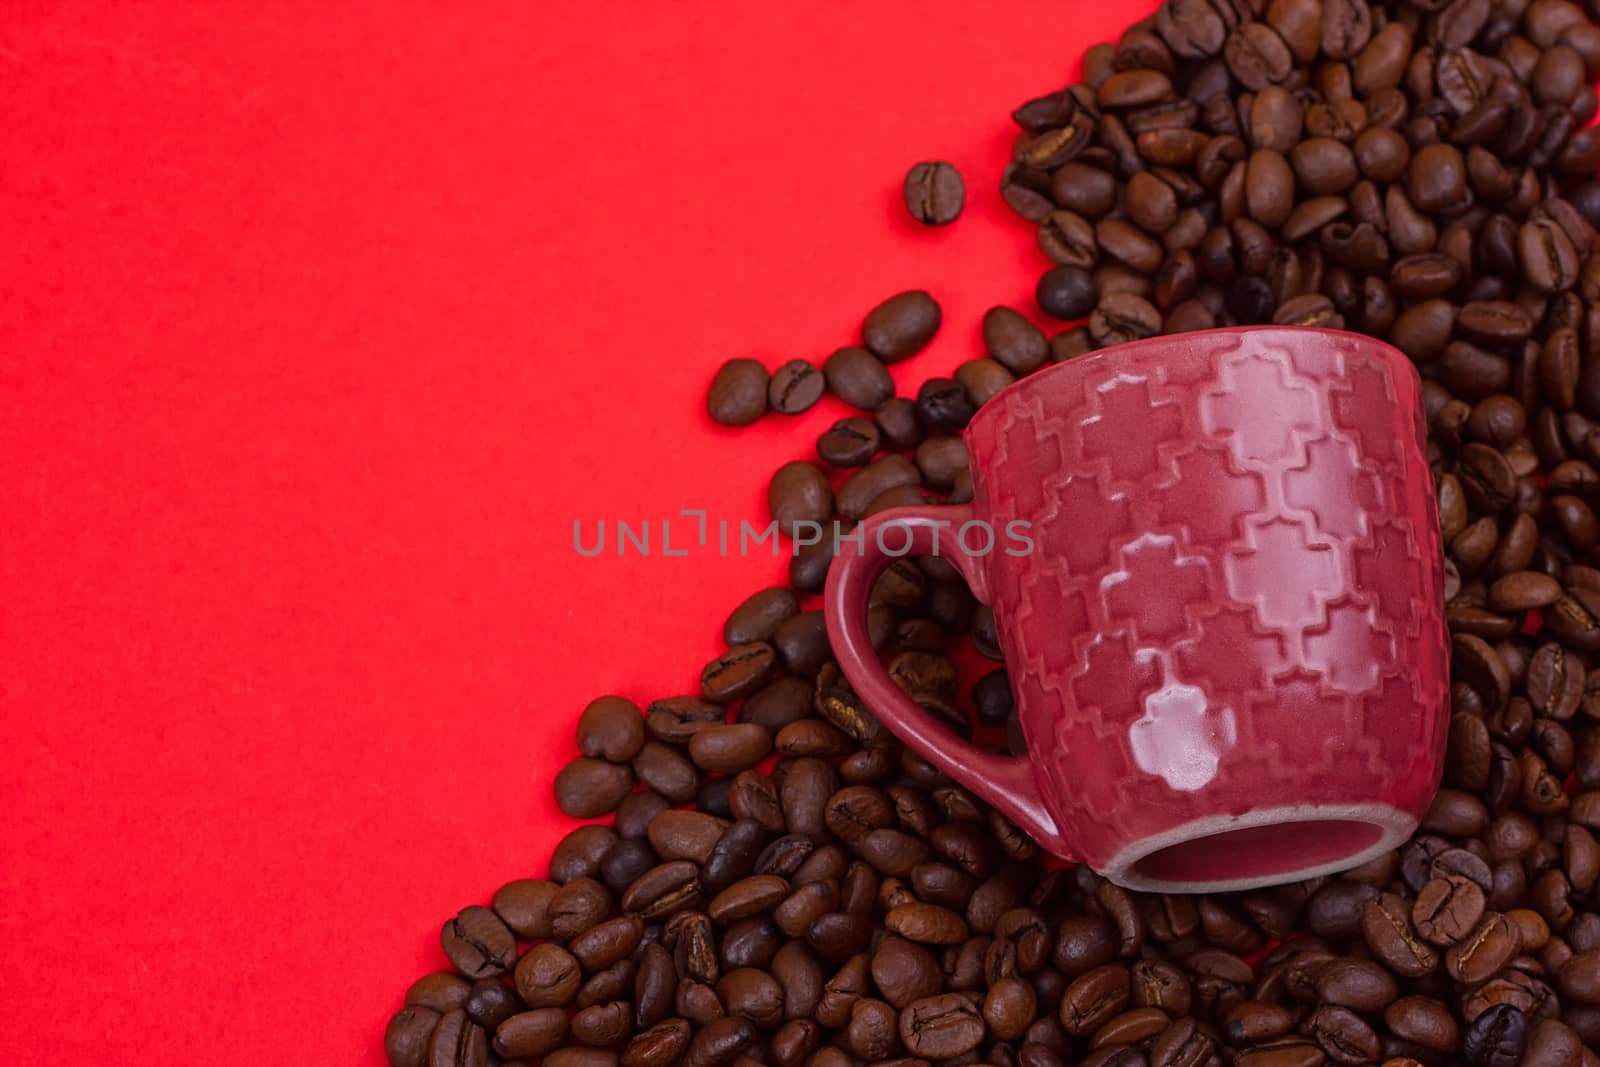 Empty coffee cup and coffee beans on a red background